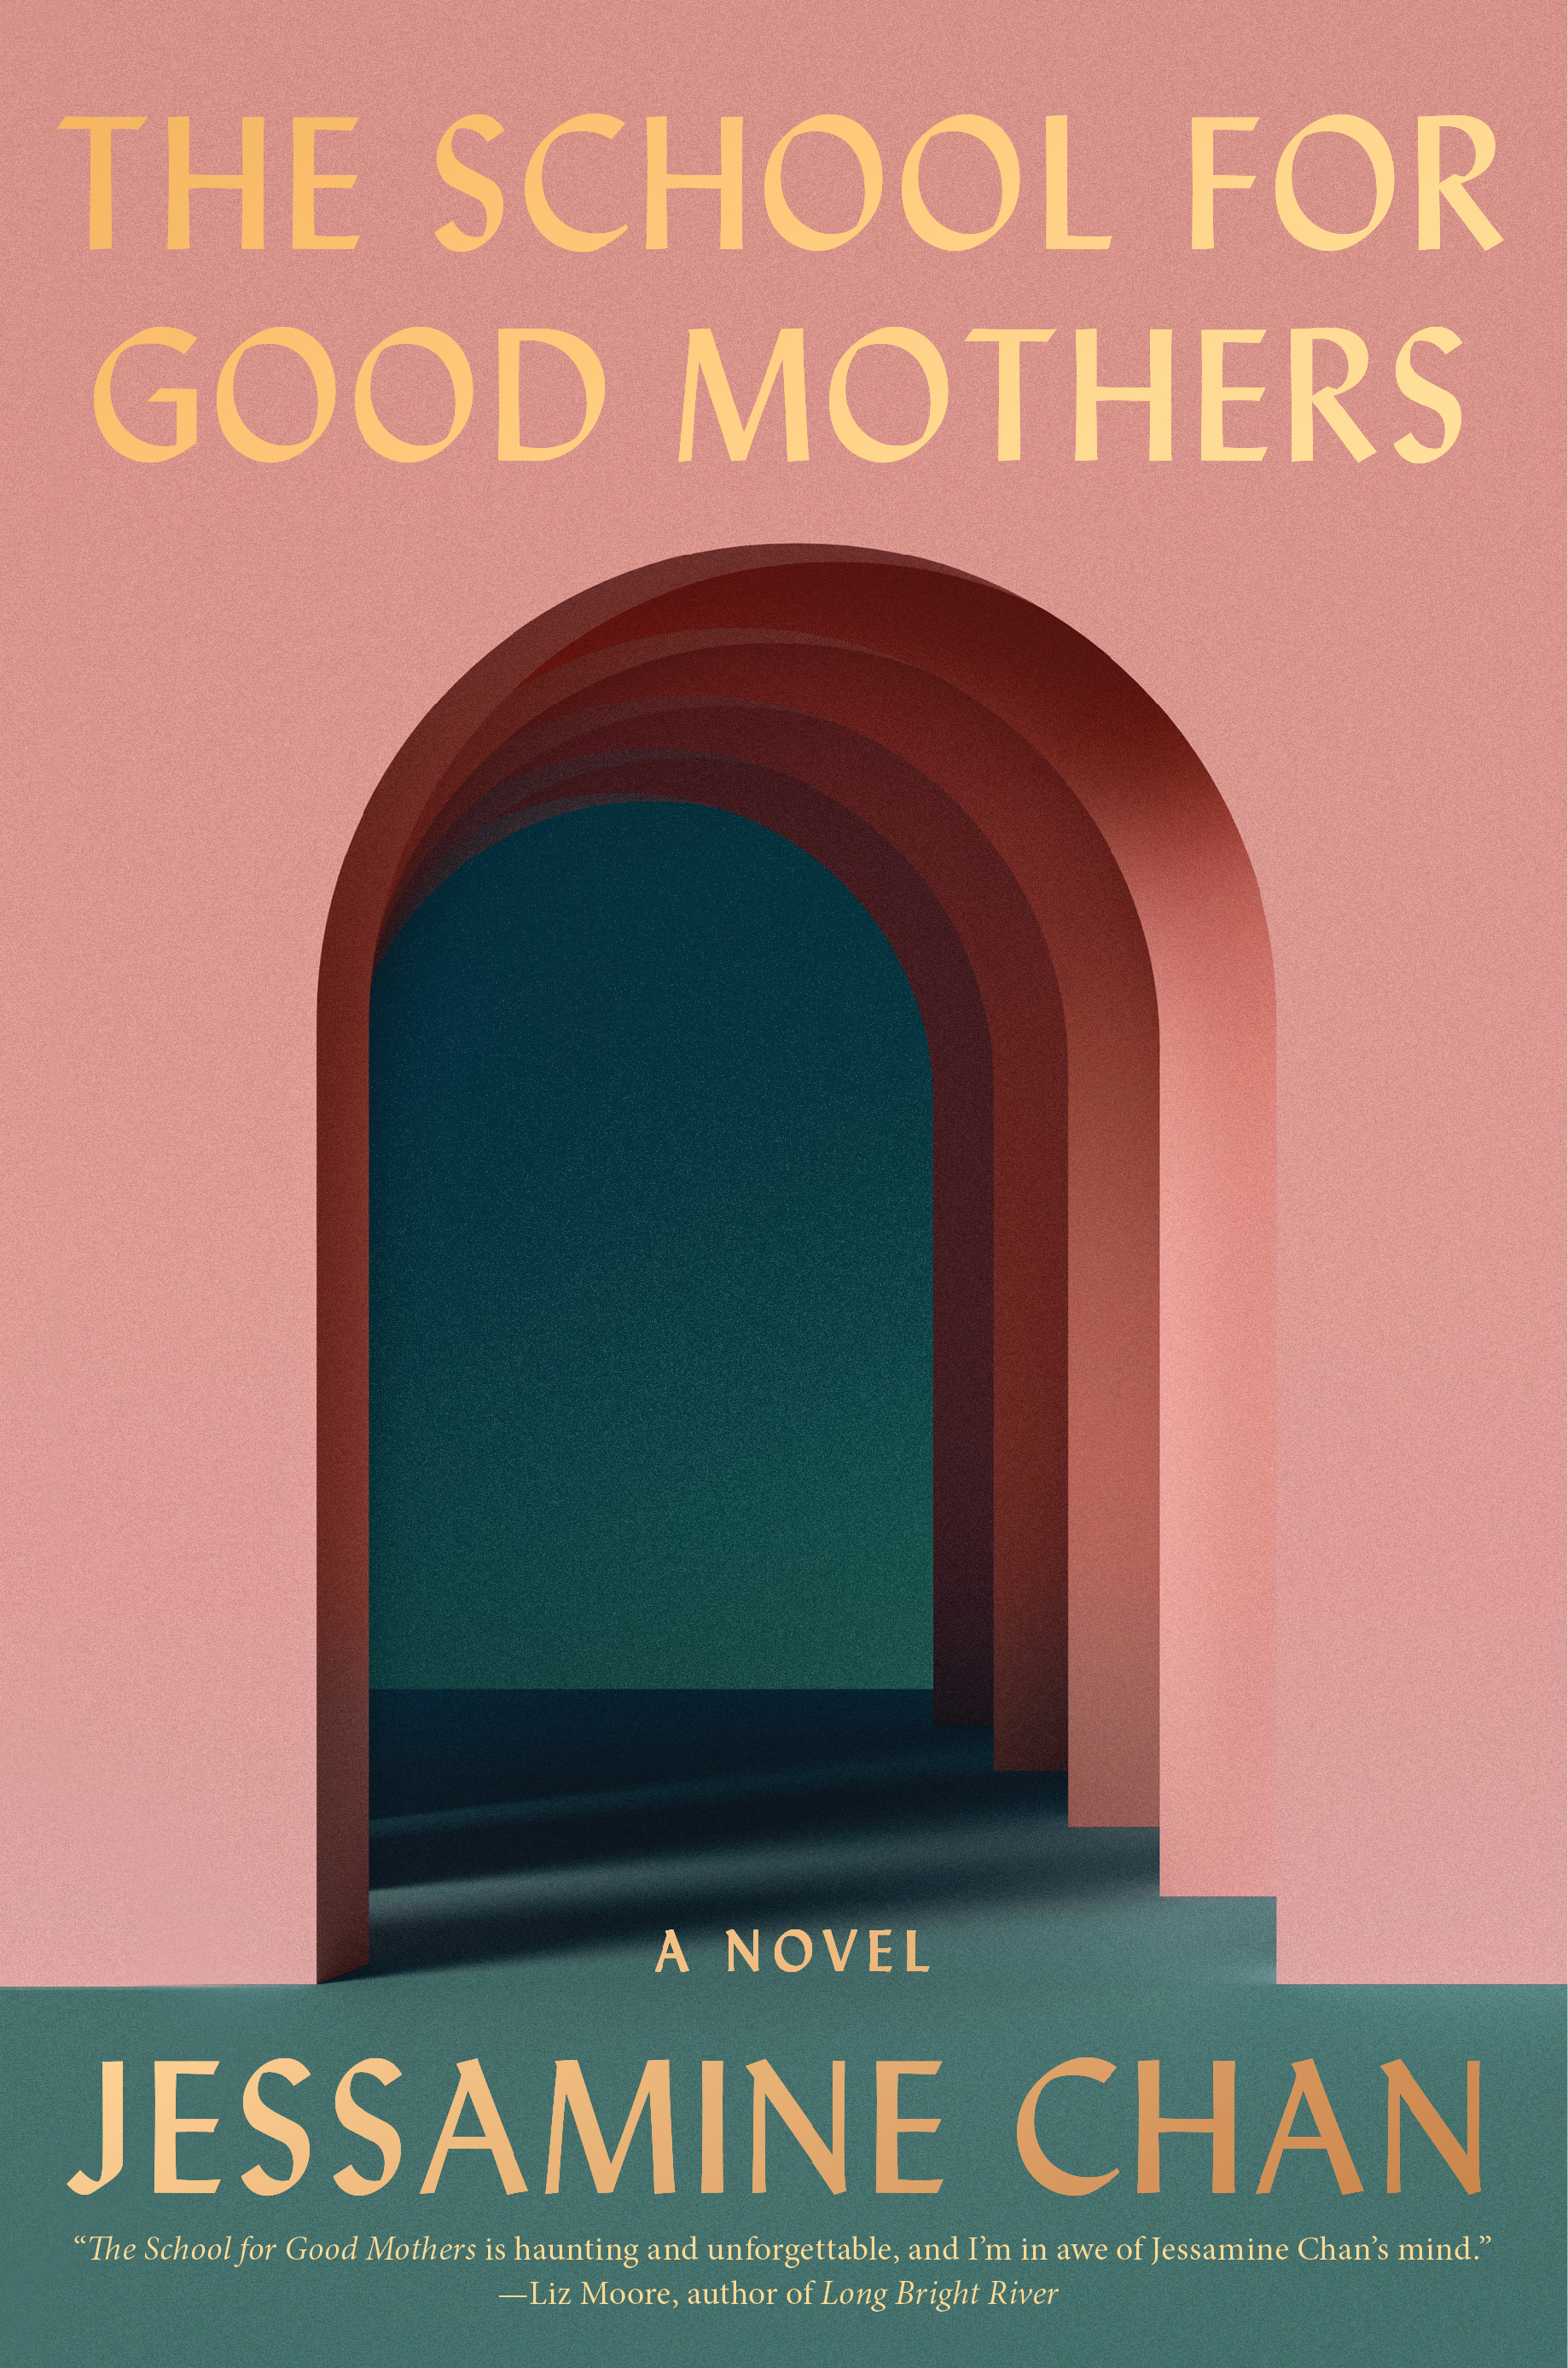 Cover image of The School for Good Mothers by Jessamine Chan